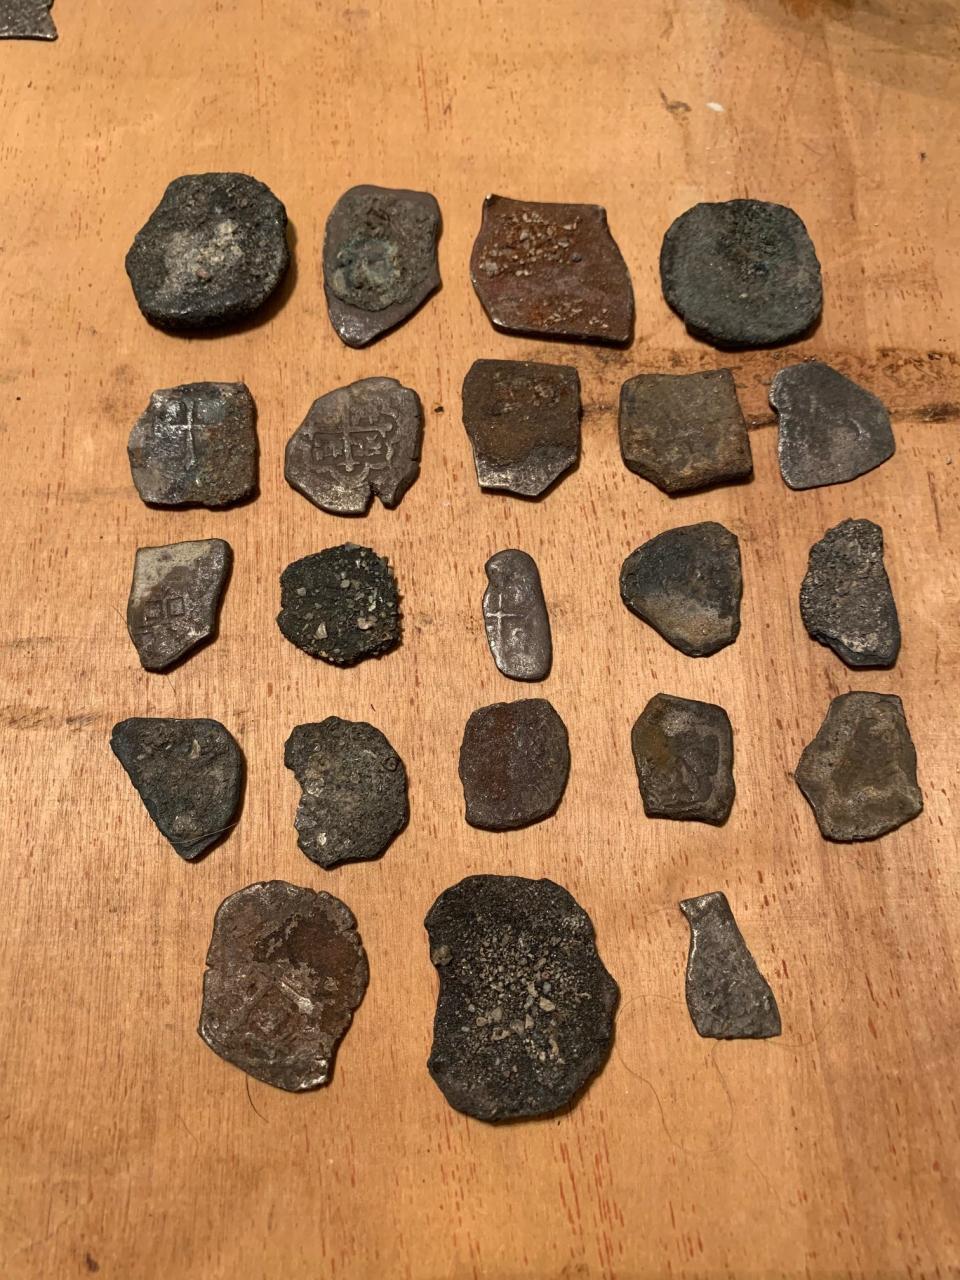 Treasure hunter Jonah Martinez, 43, of Port St. Lucie, found 22 Spanish coins from a 1715 shipwreck at Turtle Trail Beach Access on Feb. 21.